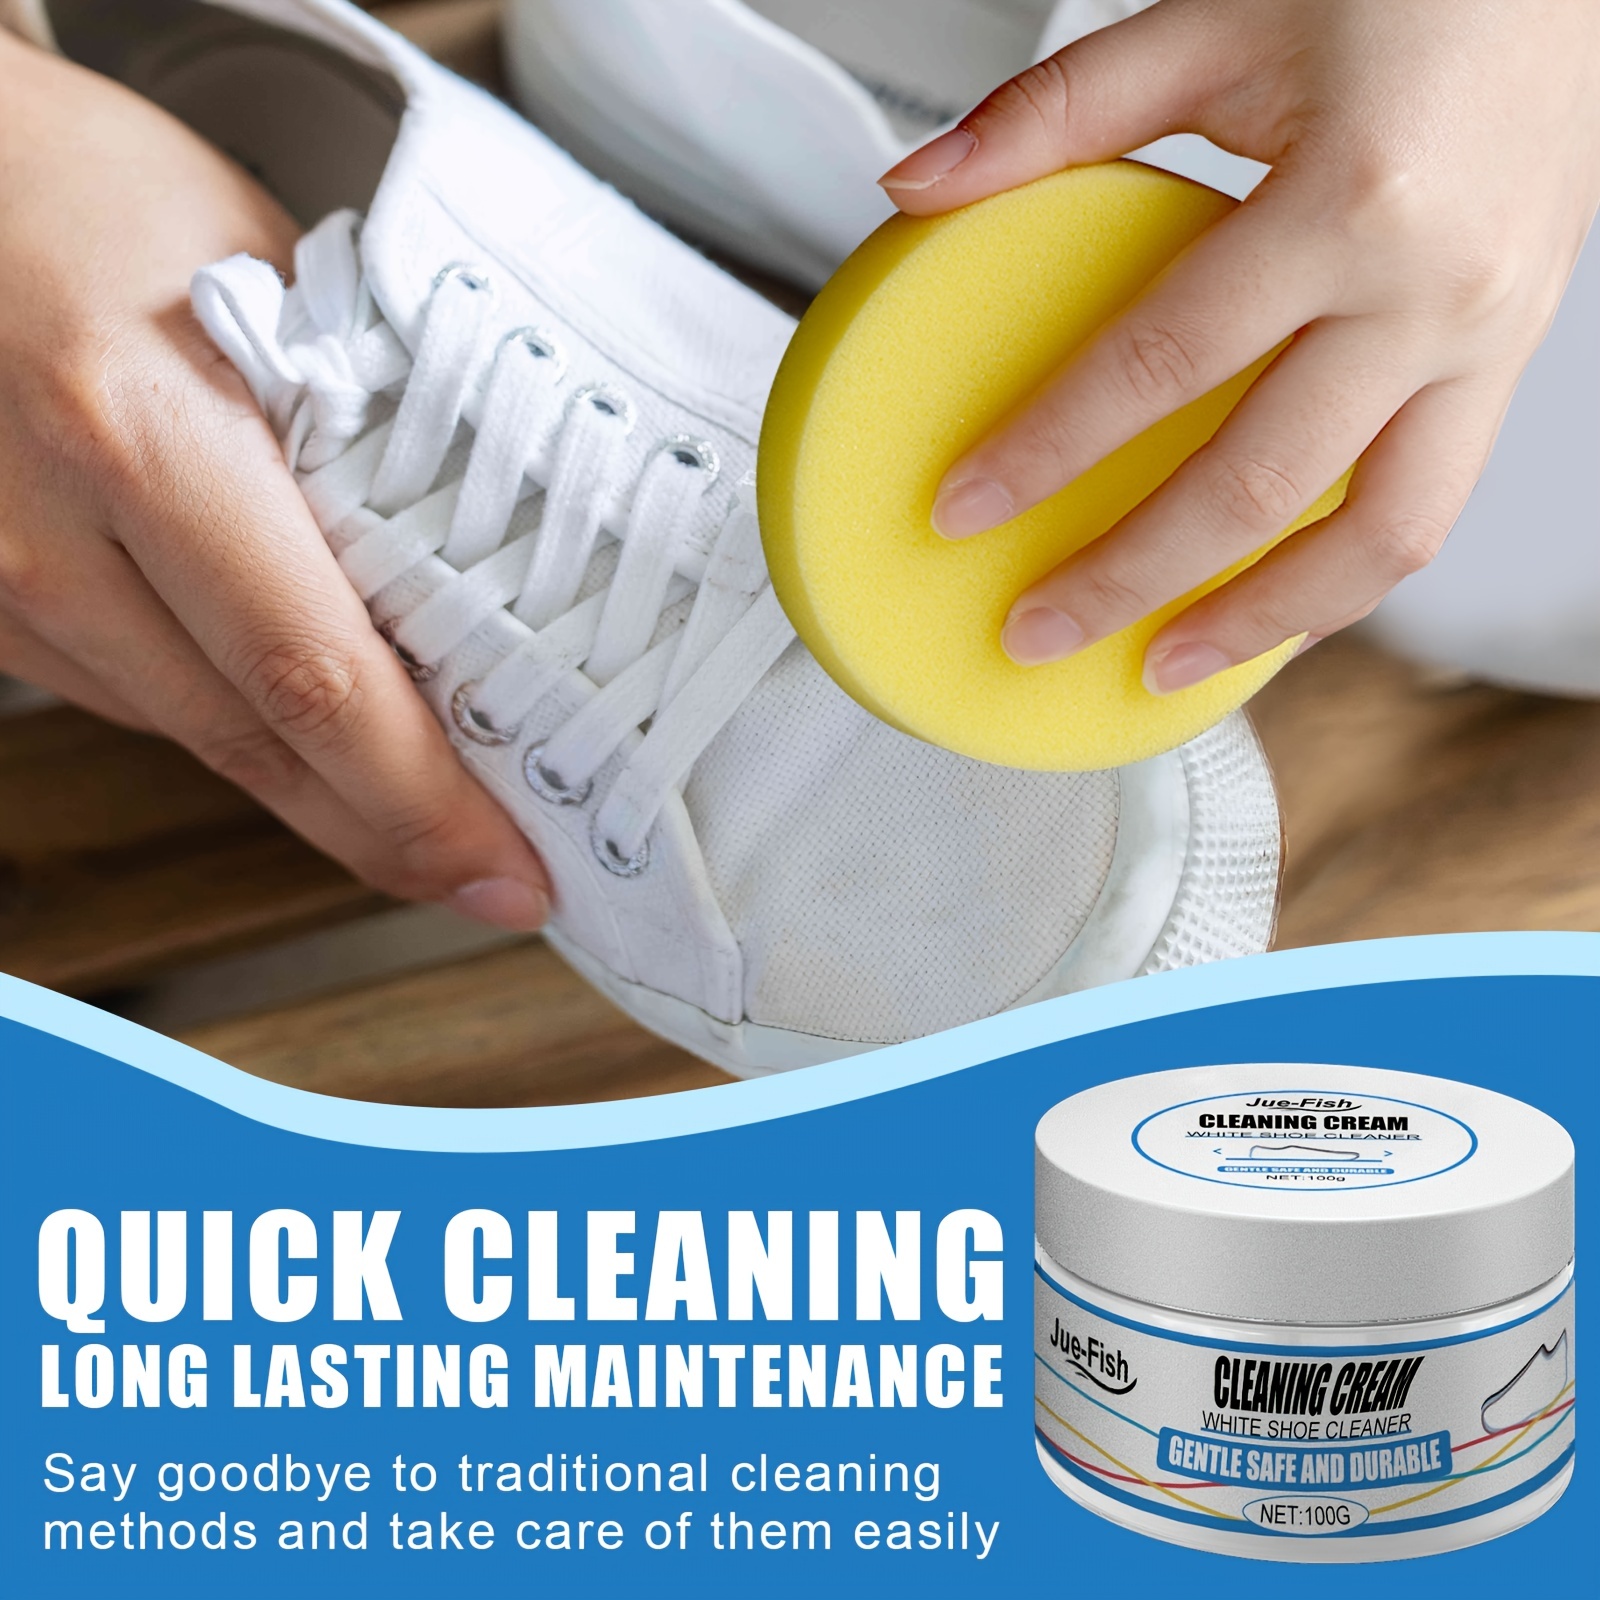 All Purpose Foam Cleaner, Sneaker Cleaning